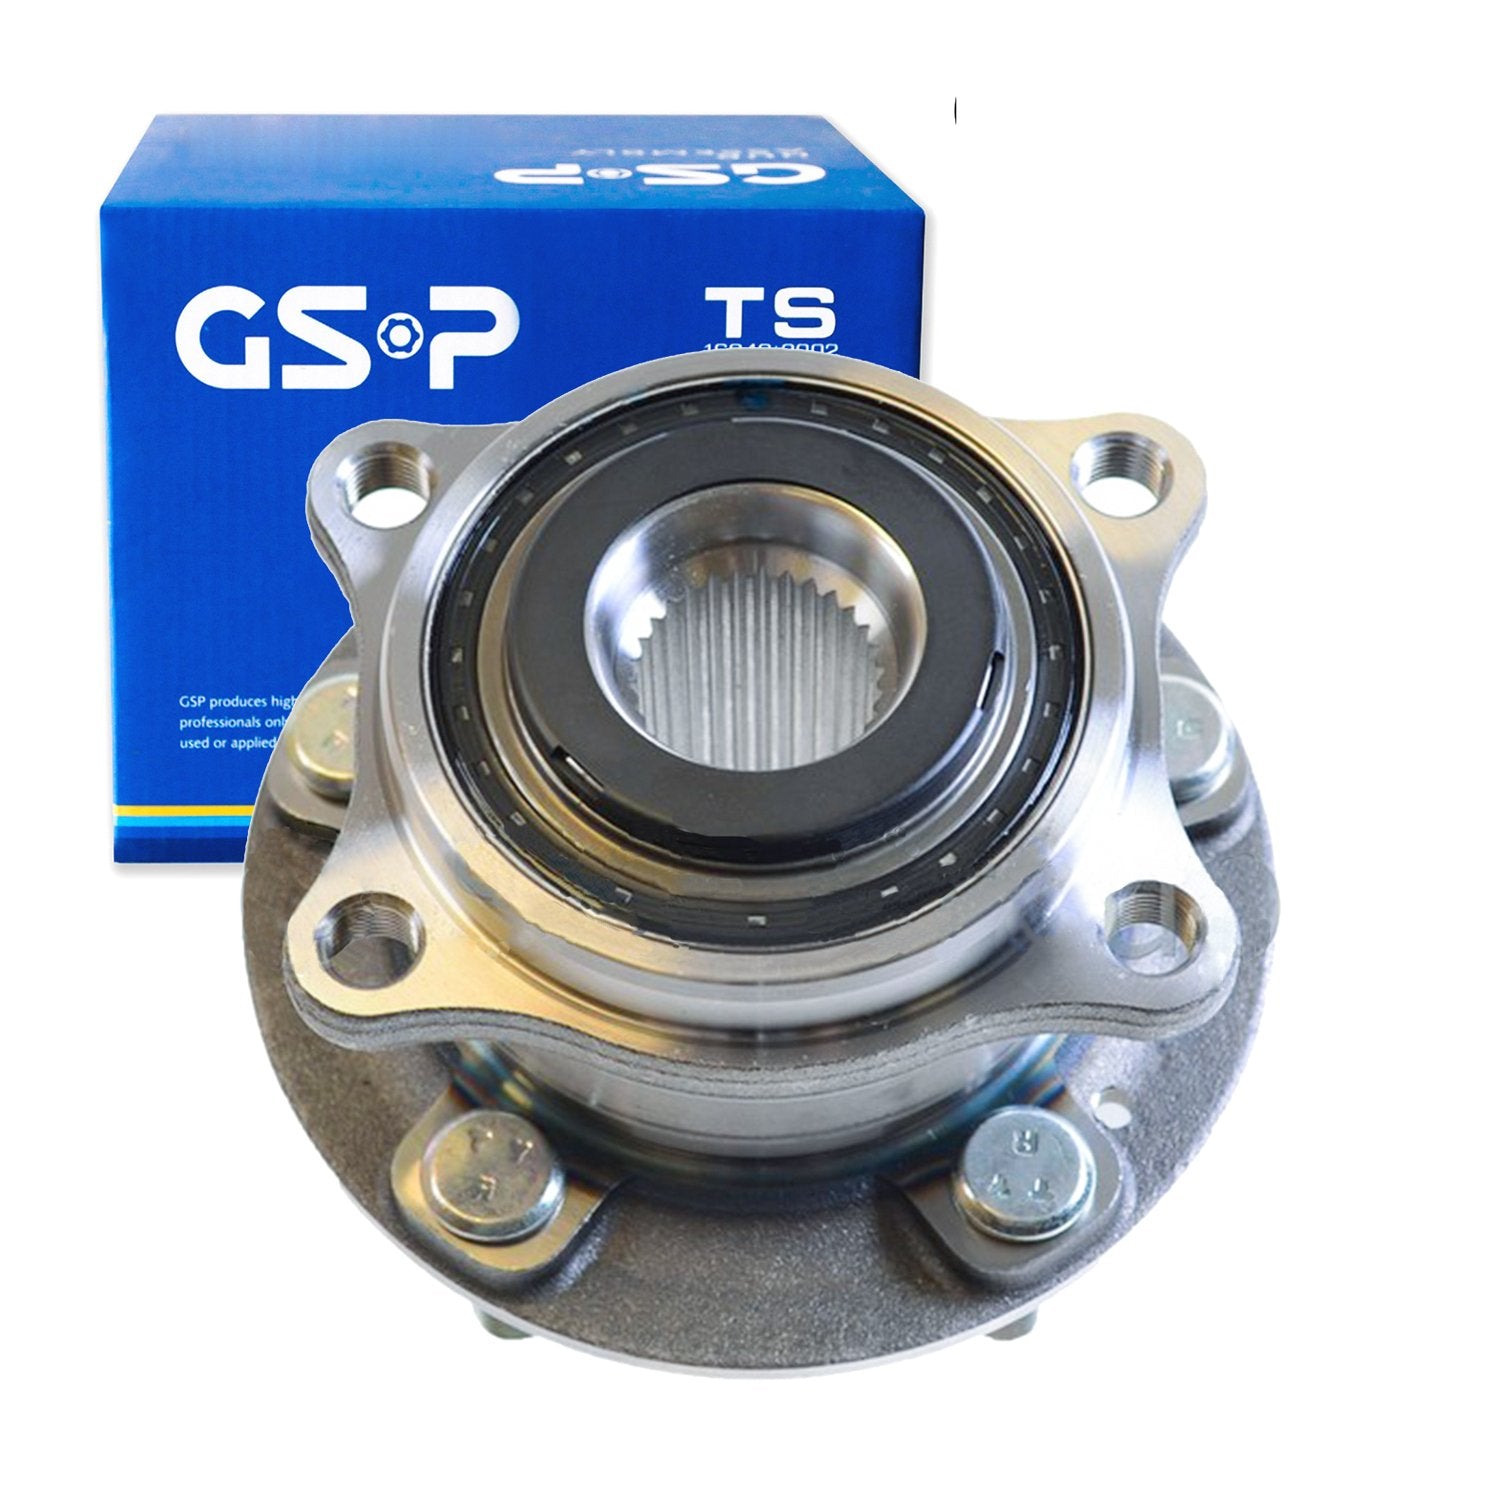 Hub Assembly, GSP+WINPOWER, 90369-T0003, 9254002 (006521) - Win Store